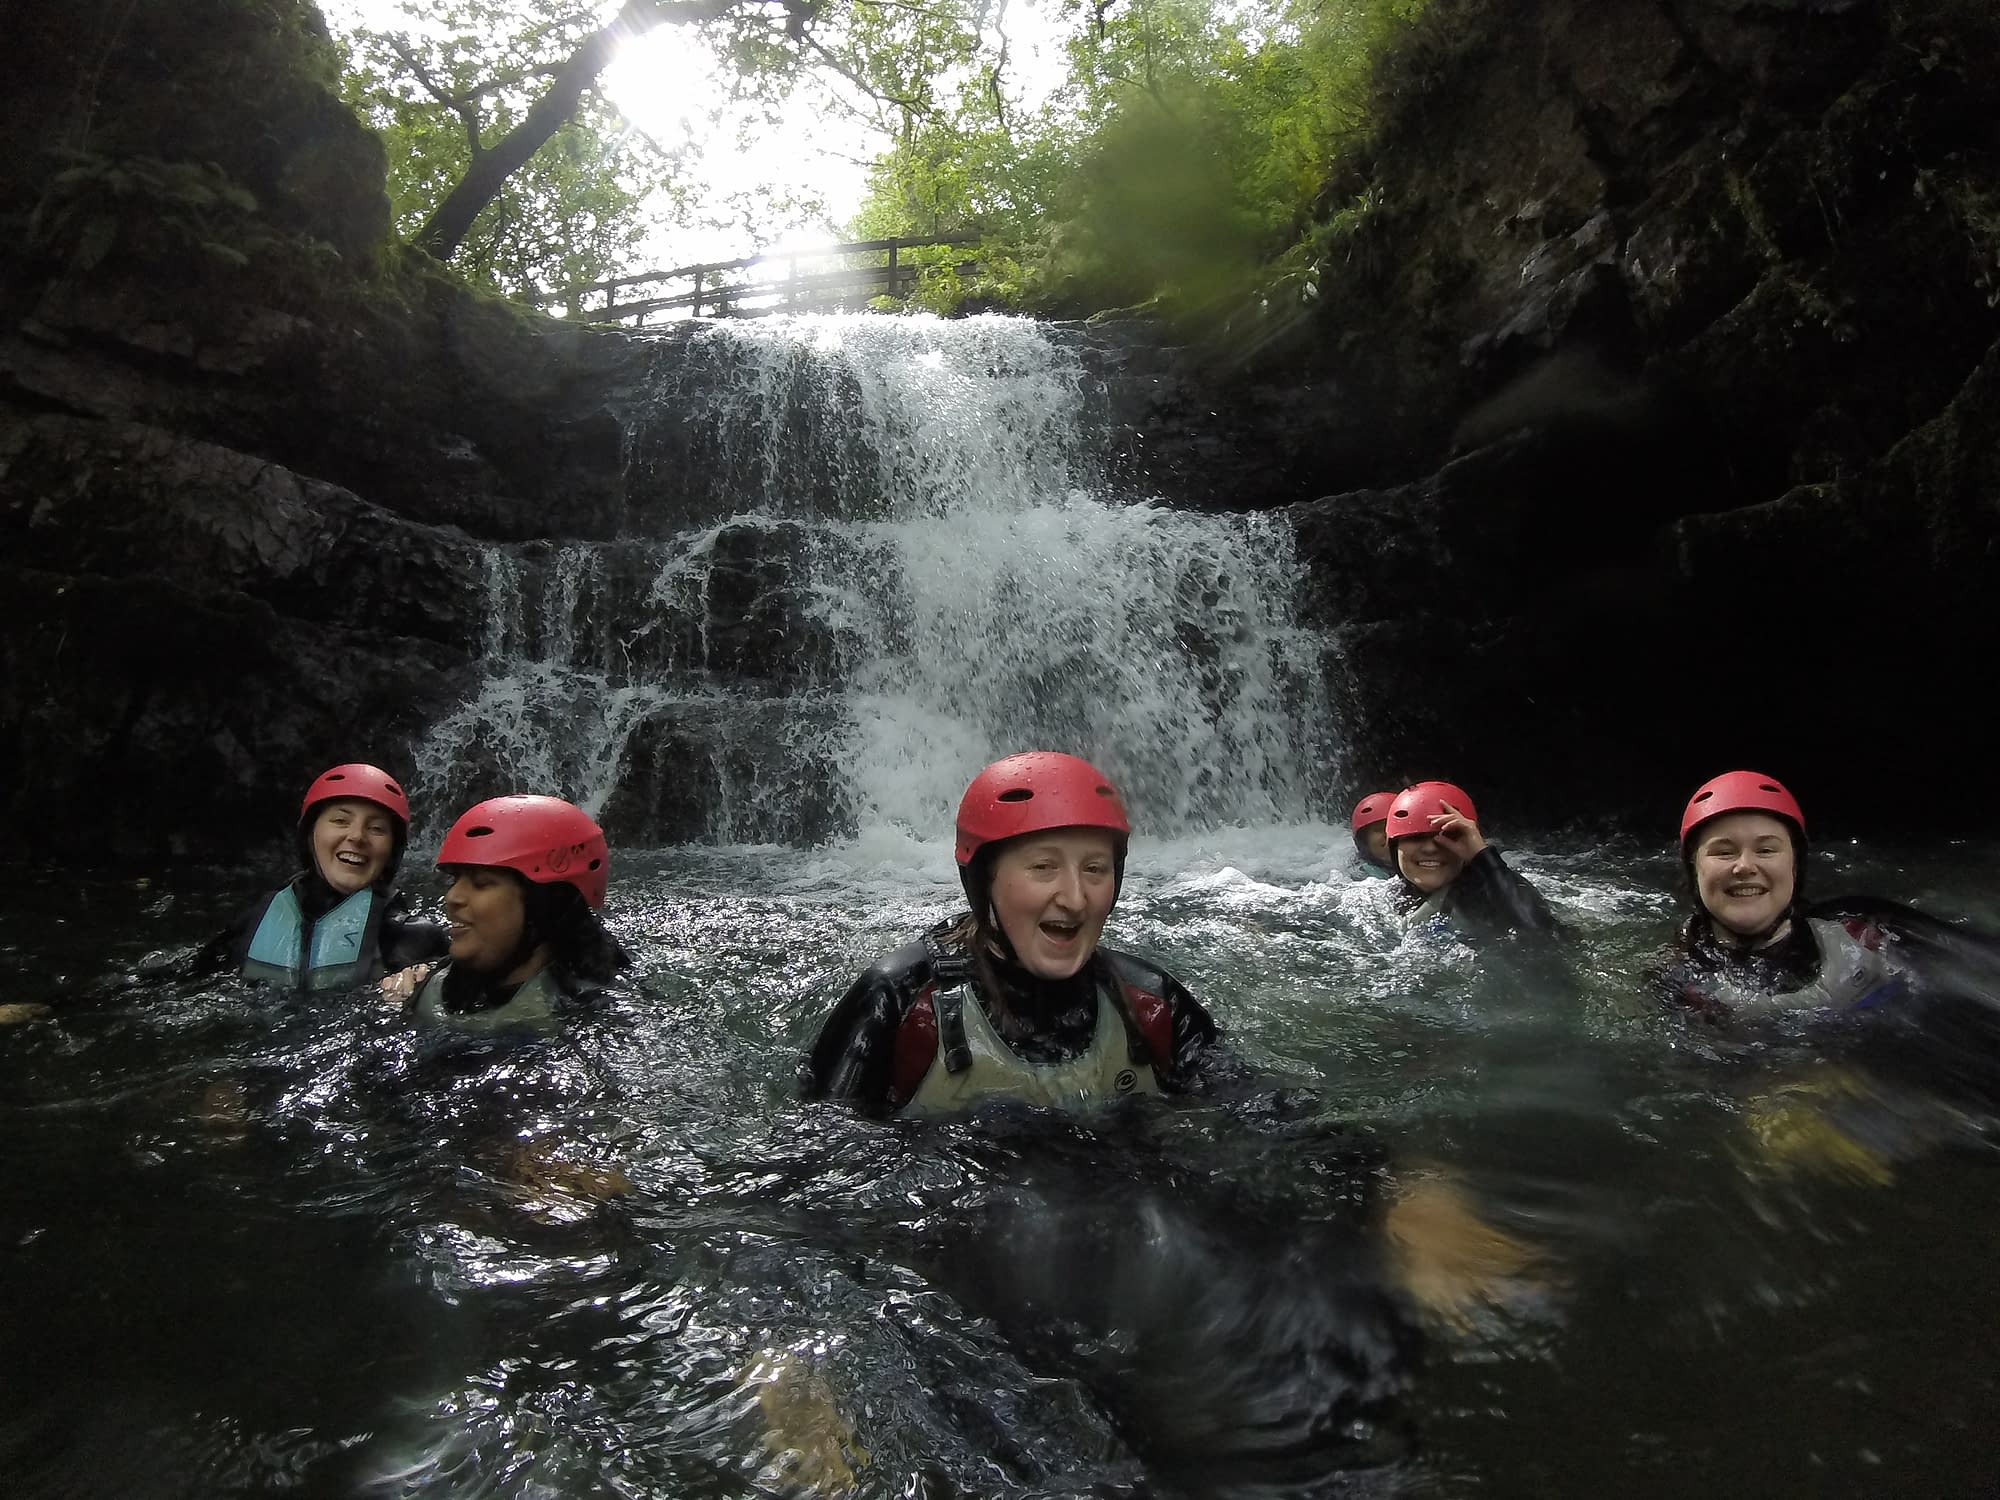 Group swimming in a plunge pool on their gorge walking activity